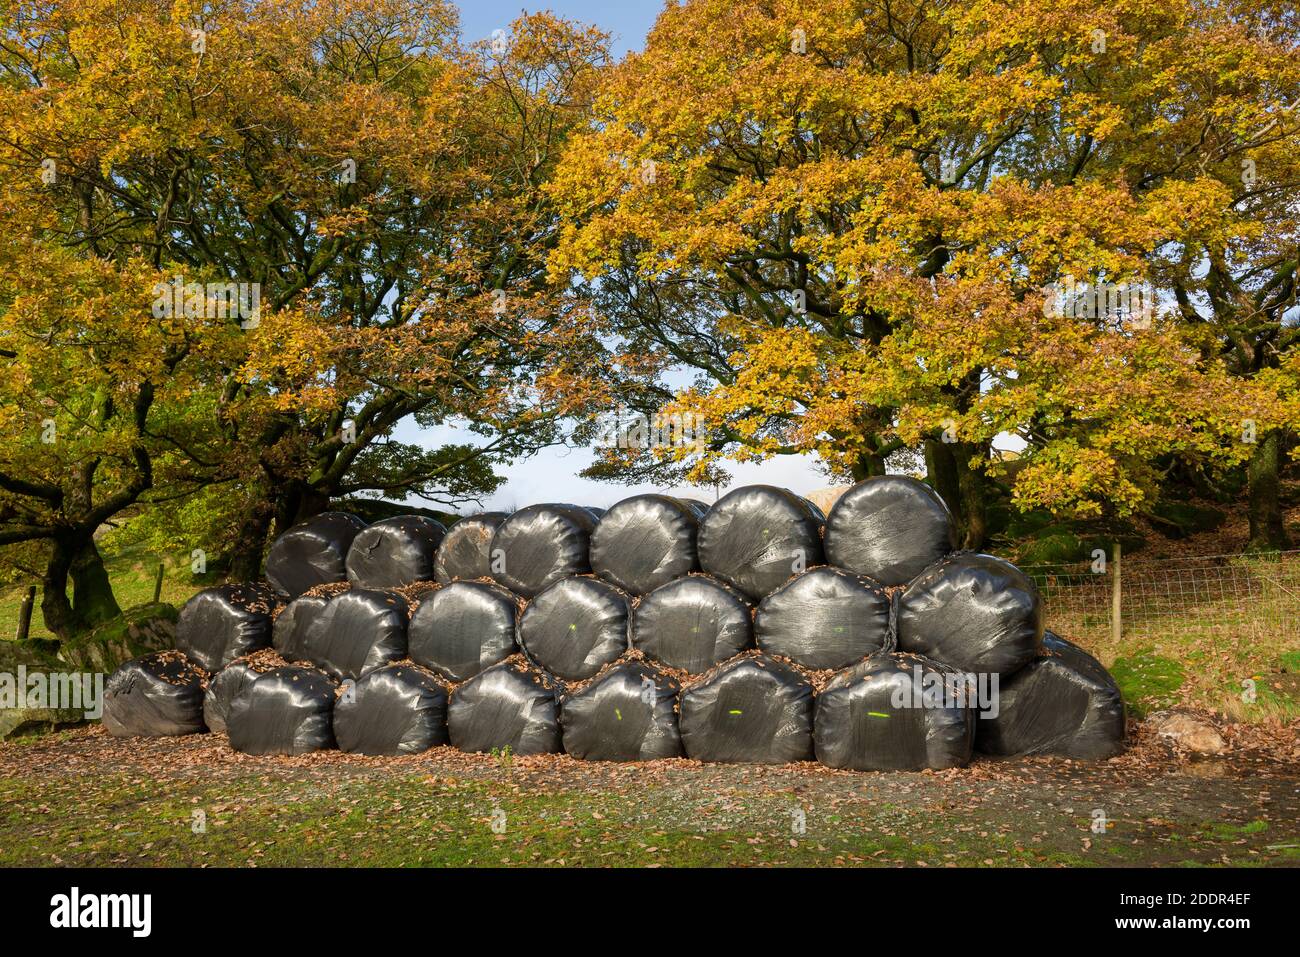 Hay bales stacked under oak trees in autumn in the Duddon Valley in the Lake District National Park, Cumbria, England. Stock Photo